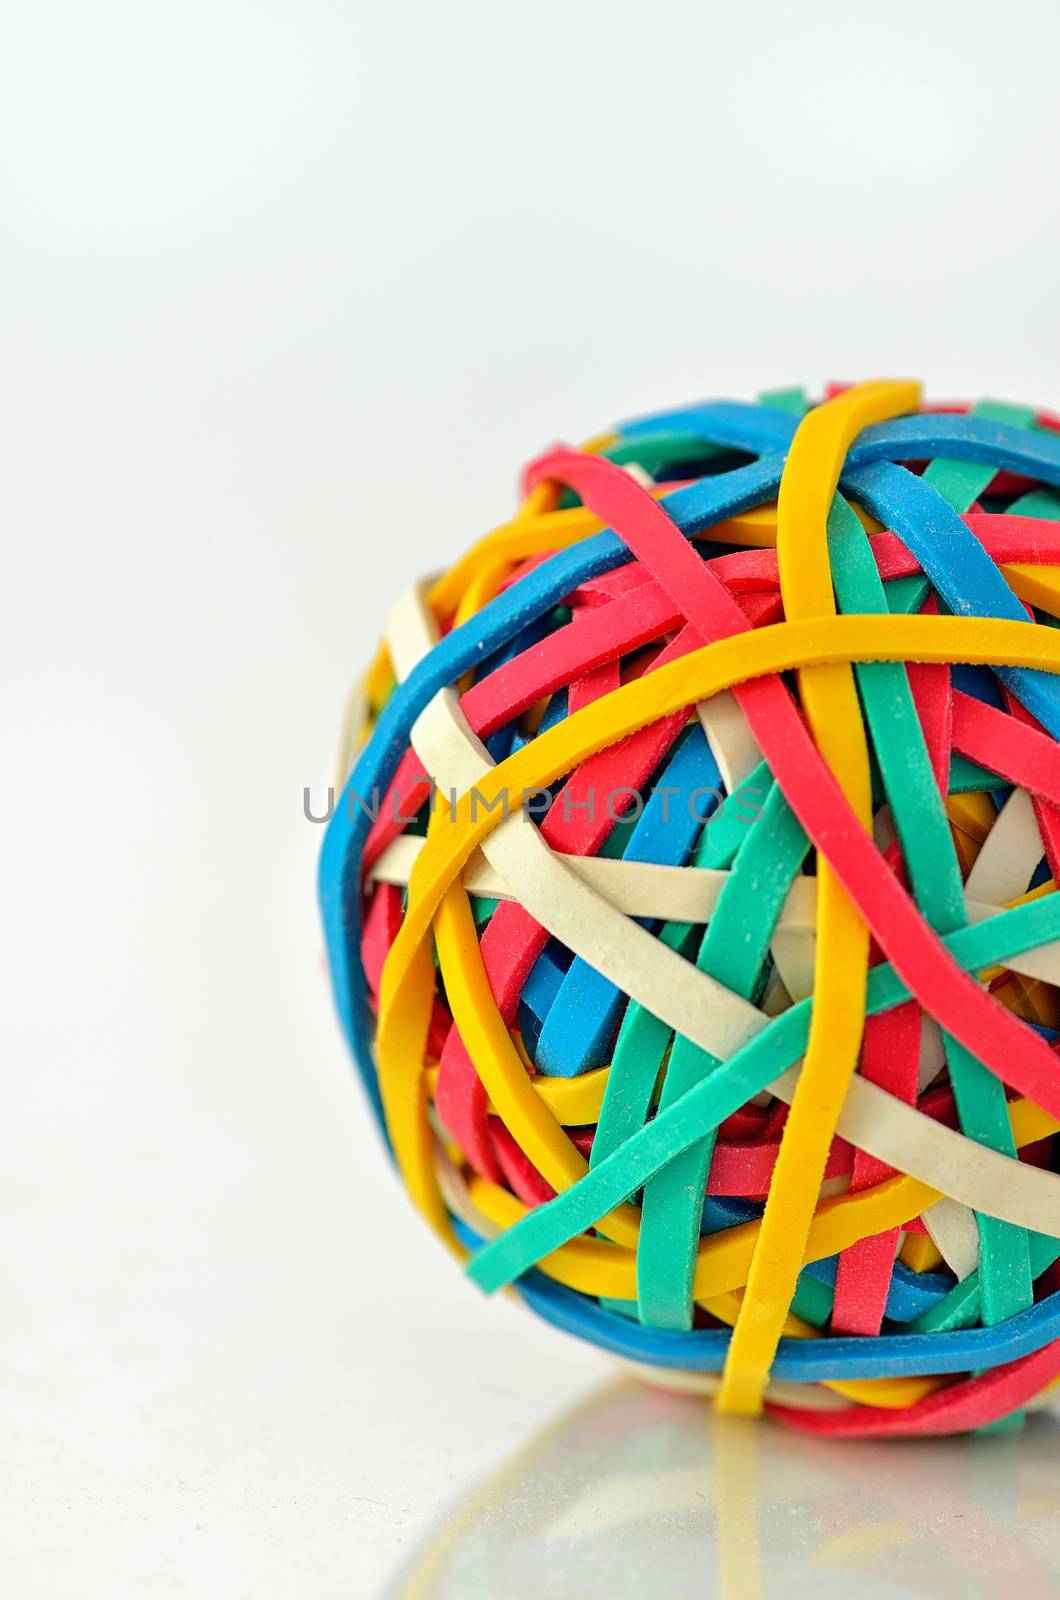 Ball Of Elastic Bands Isolated  by jordachelr